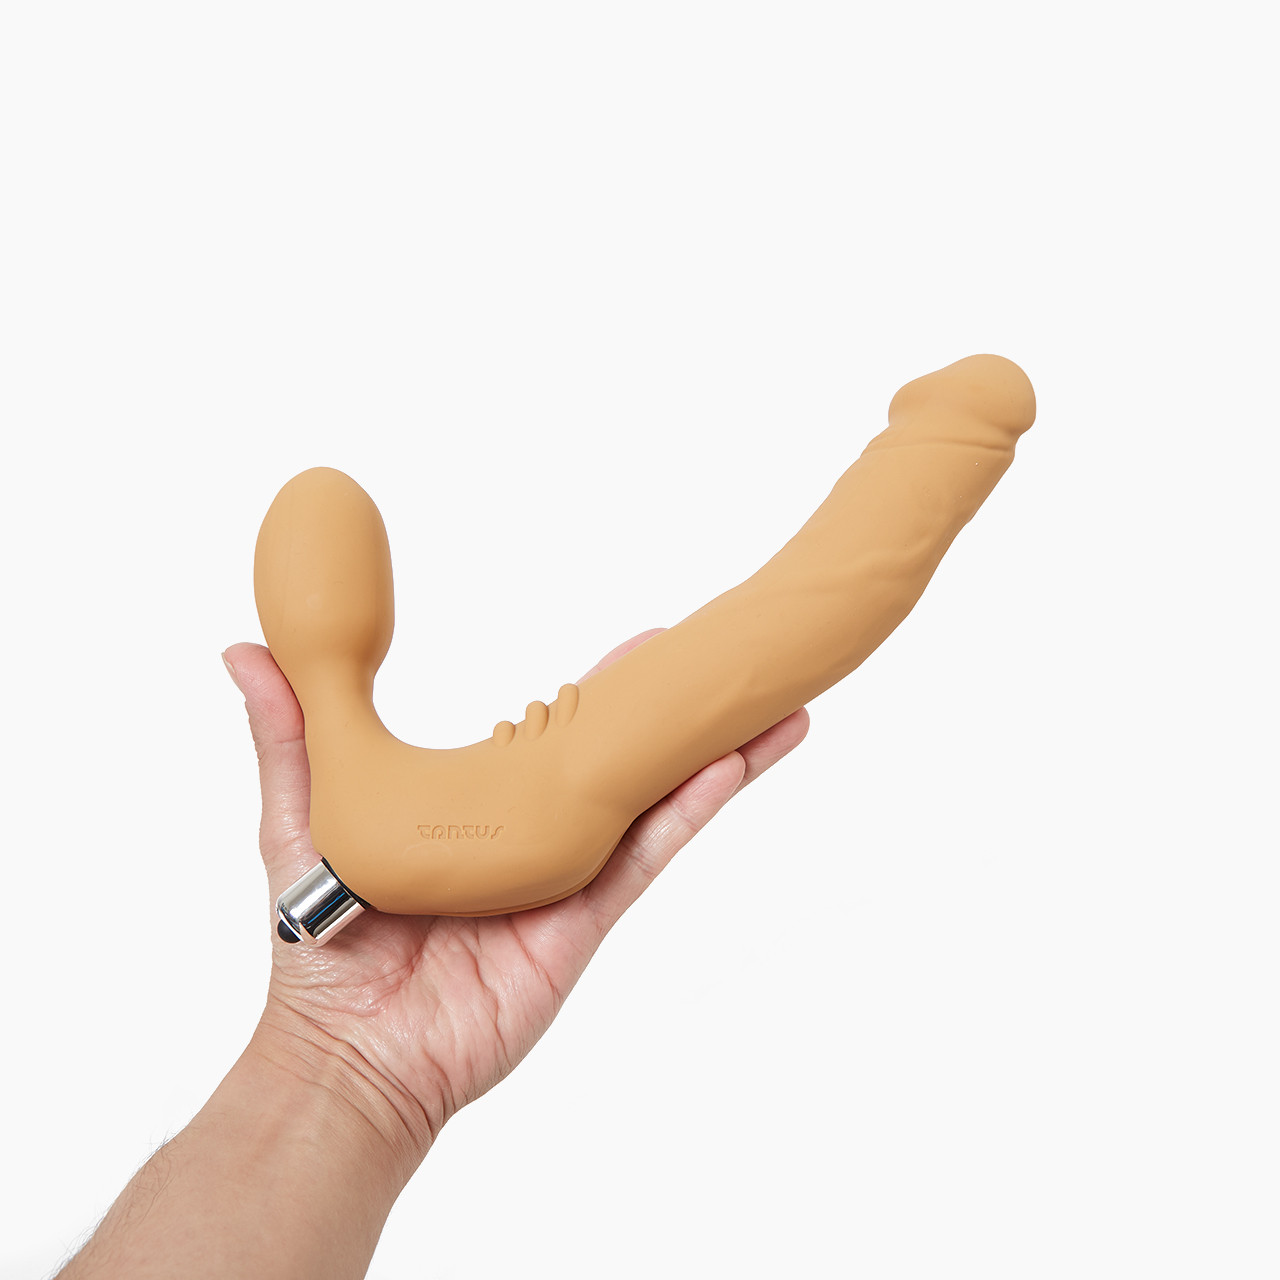 Tantus Real Strapless Strap On held in a hand